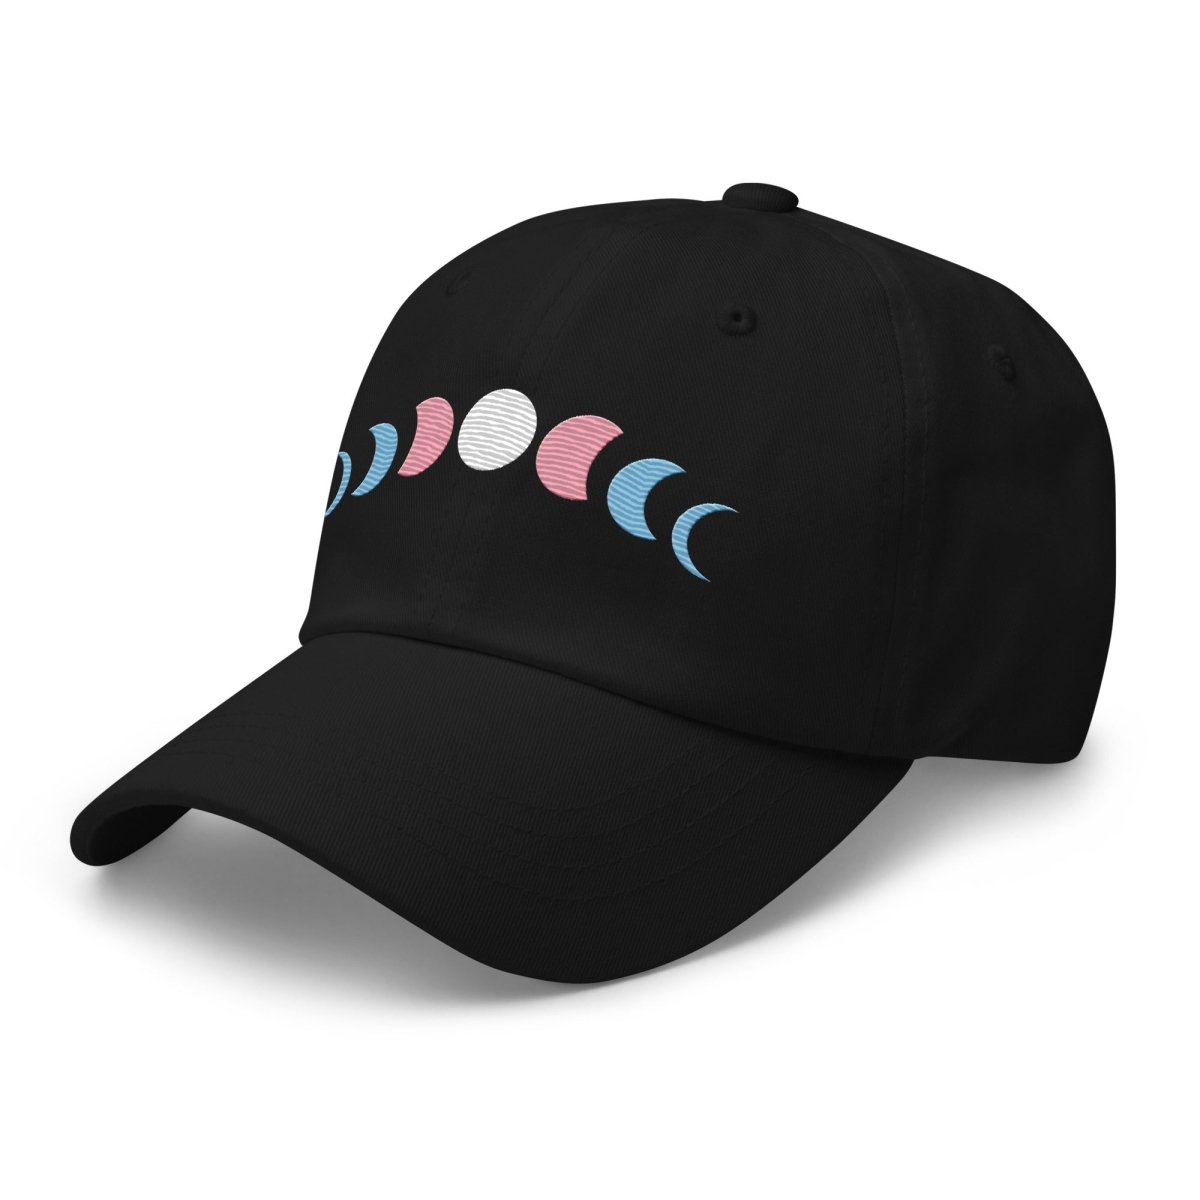 Embroidered Transgender Moon Phases Dad Hat - On Trend Shirts